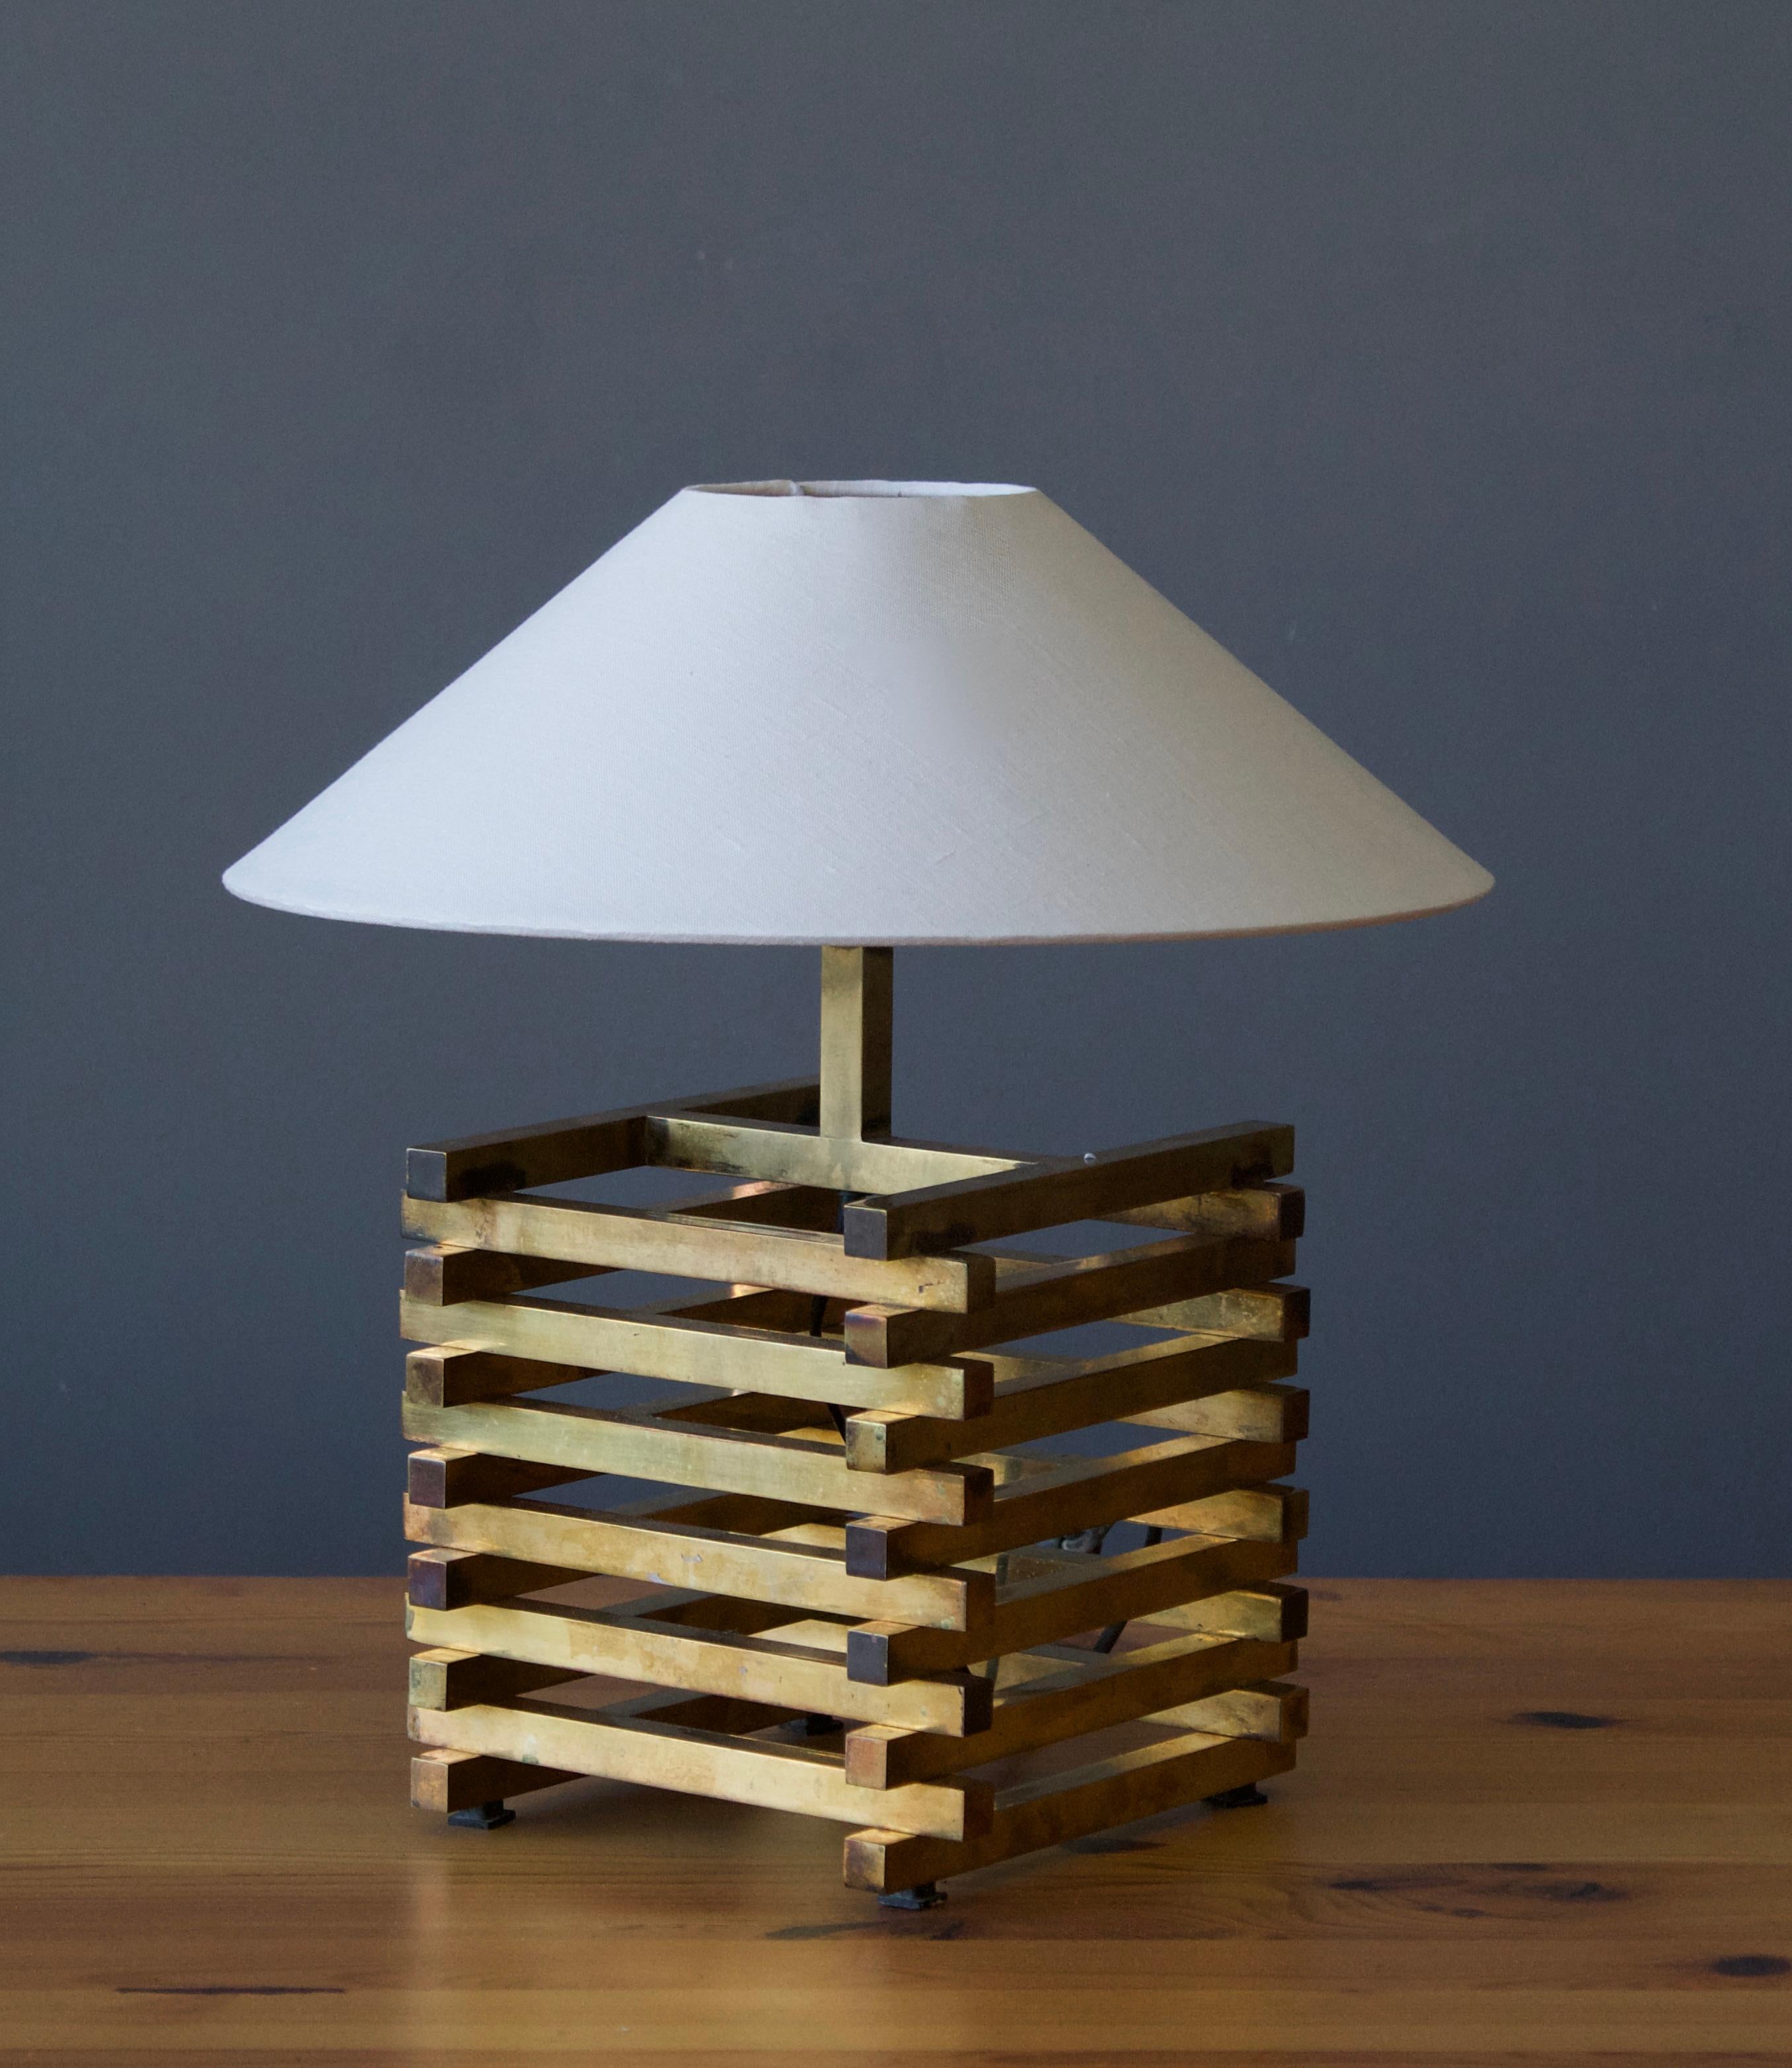 A pair of table lamps, designed and produced in Italy, 1970s. In brass. 

Stated dimensions exclude lampshade, height includes socket. Sold without lampshades.

Other designers of the period include Gabriella Crespi, Donald Judd, Max Ingrand,